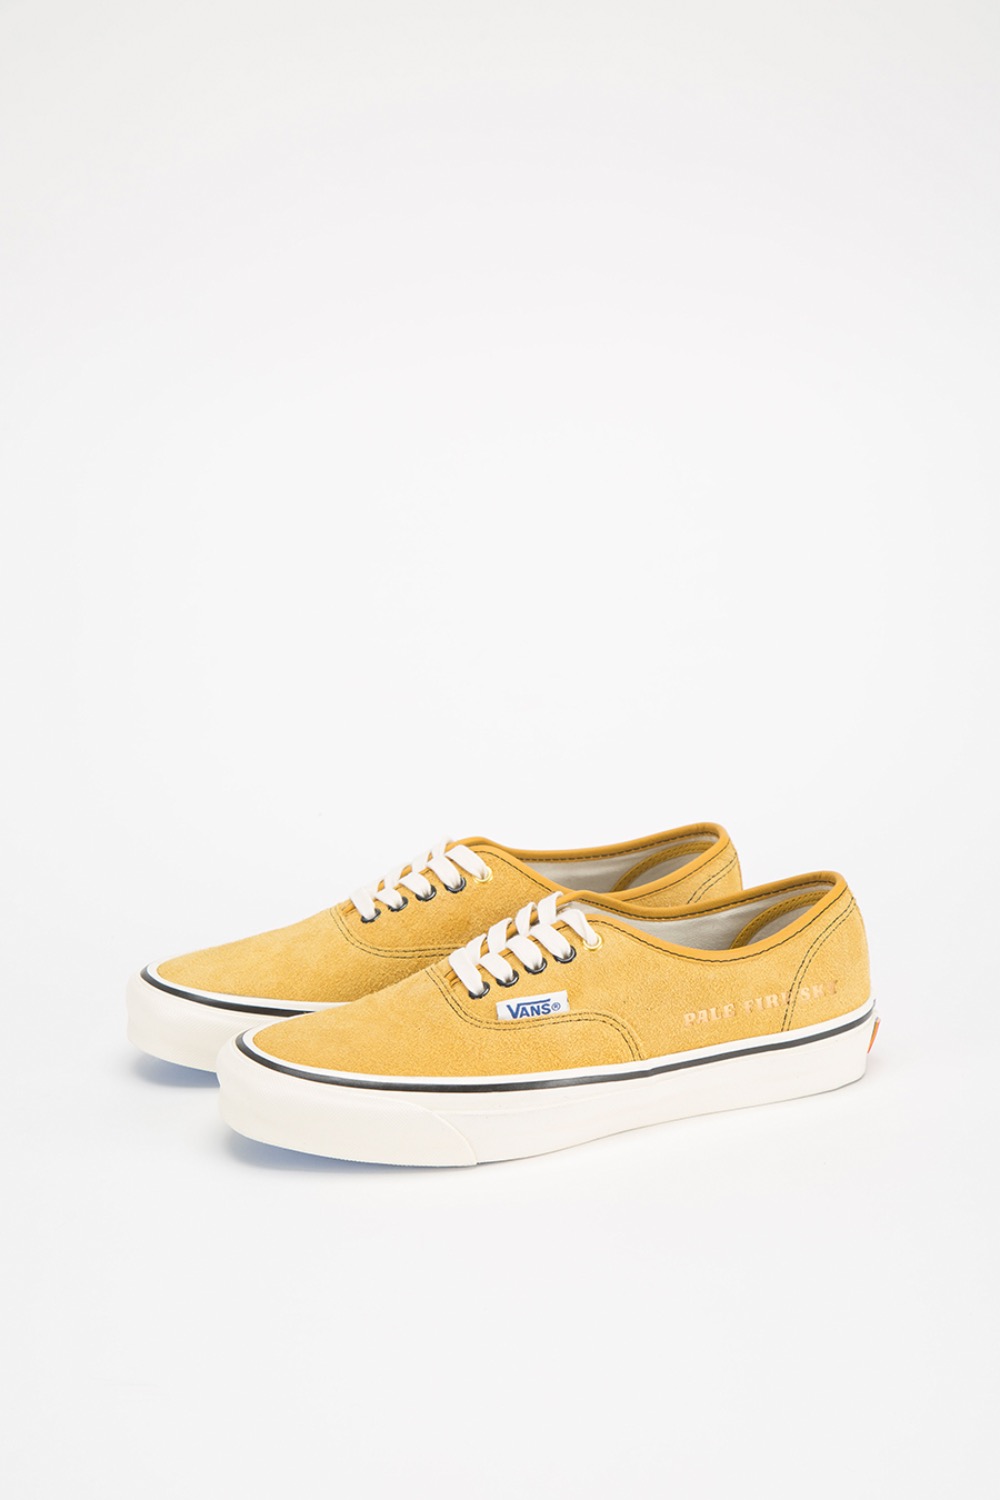 AUTHENTIC SP LX(JULIAN KLINCEWICZ) HAIRY SUEDE/NUGGET GOLD